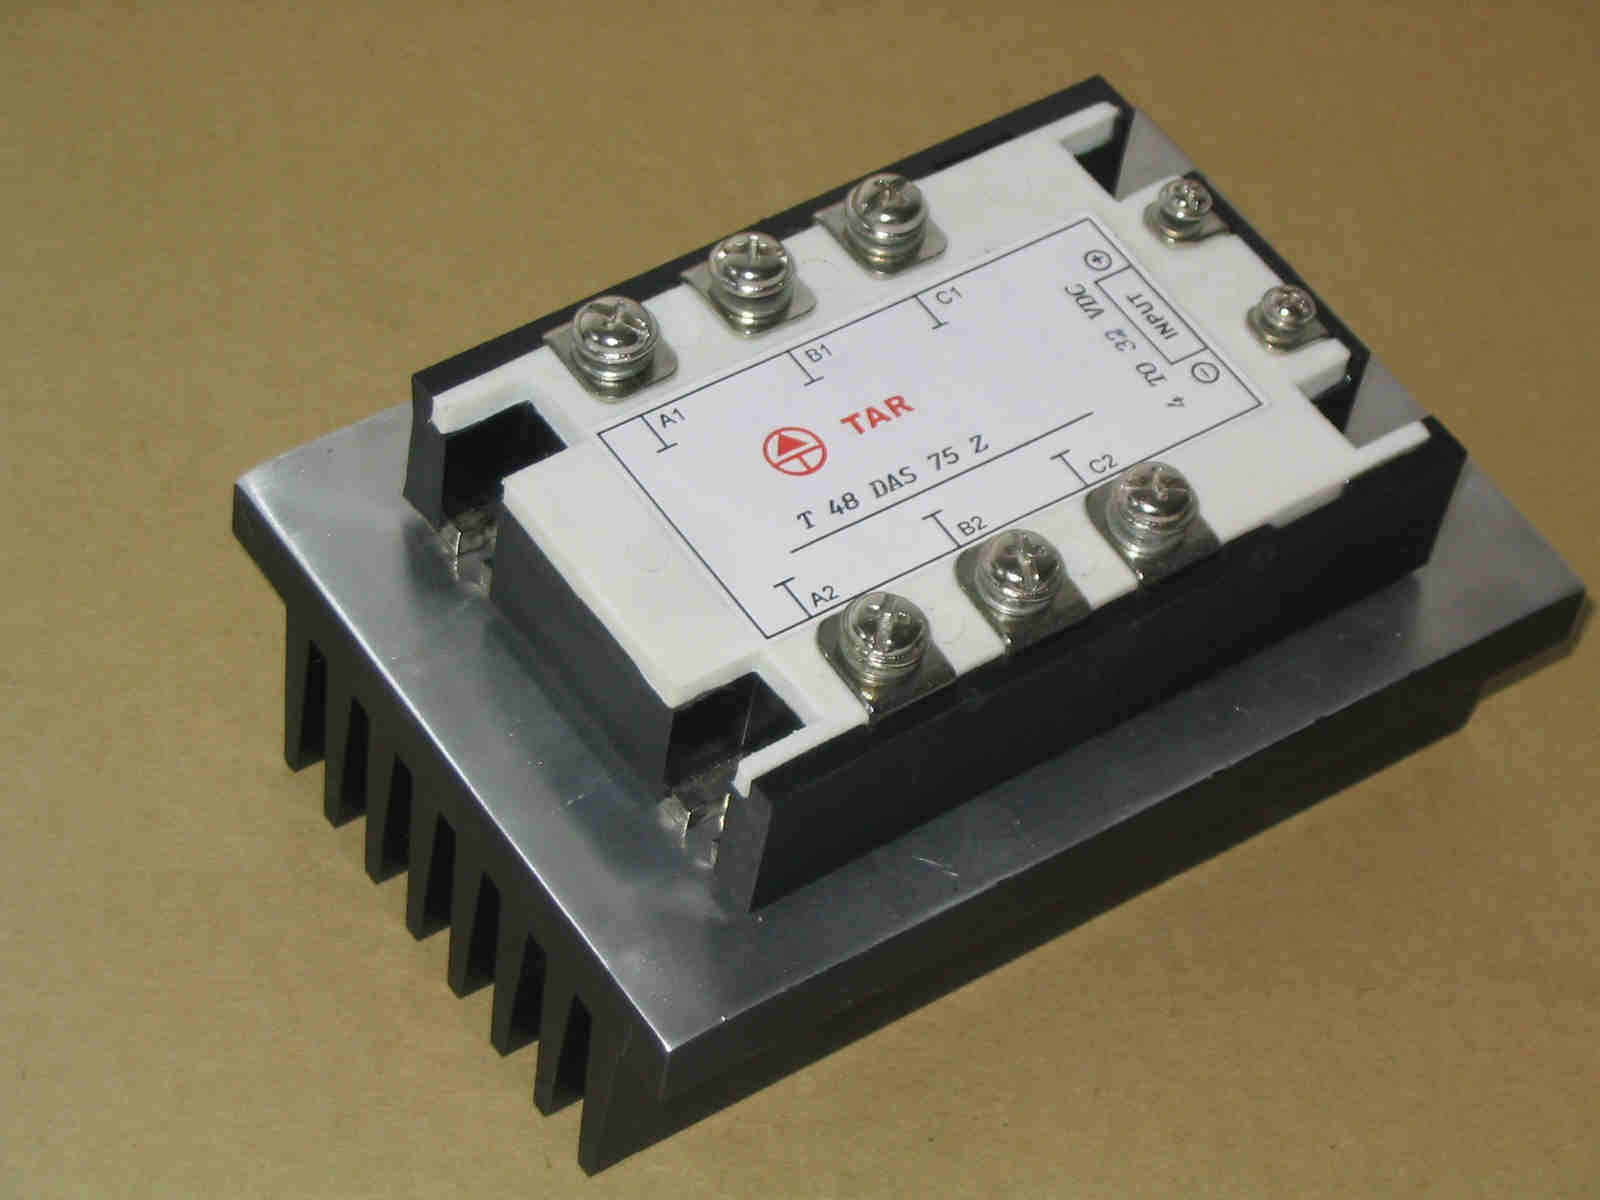  Three Phase Solid State Relay (Три фазы Solid State Relay)